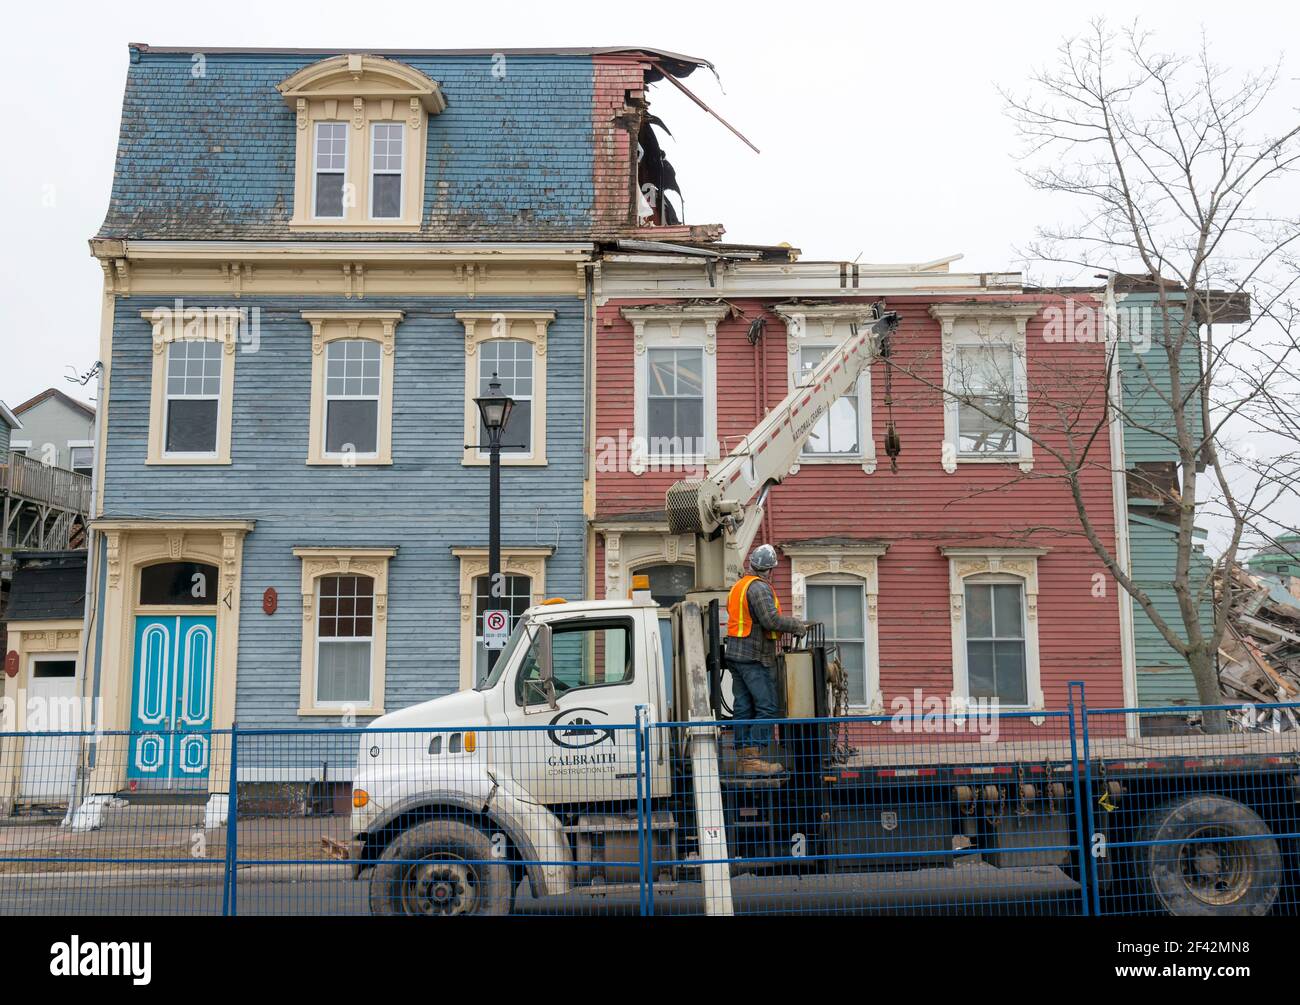 Saint John, New Brunswick, Canada - April 8, 2017: The historic 'jellybean' houses are demolished. These houses survived the Great Fire of 1877. Stock Photo